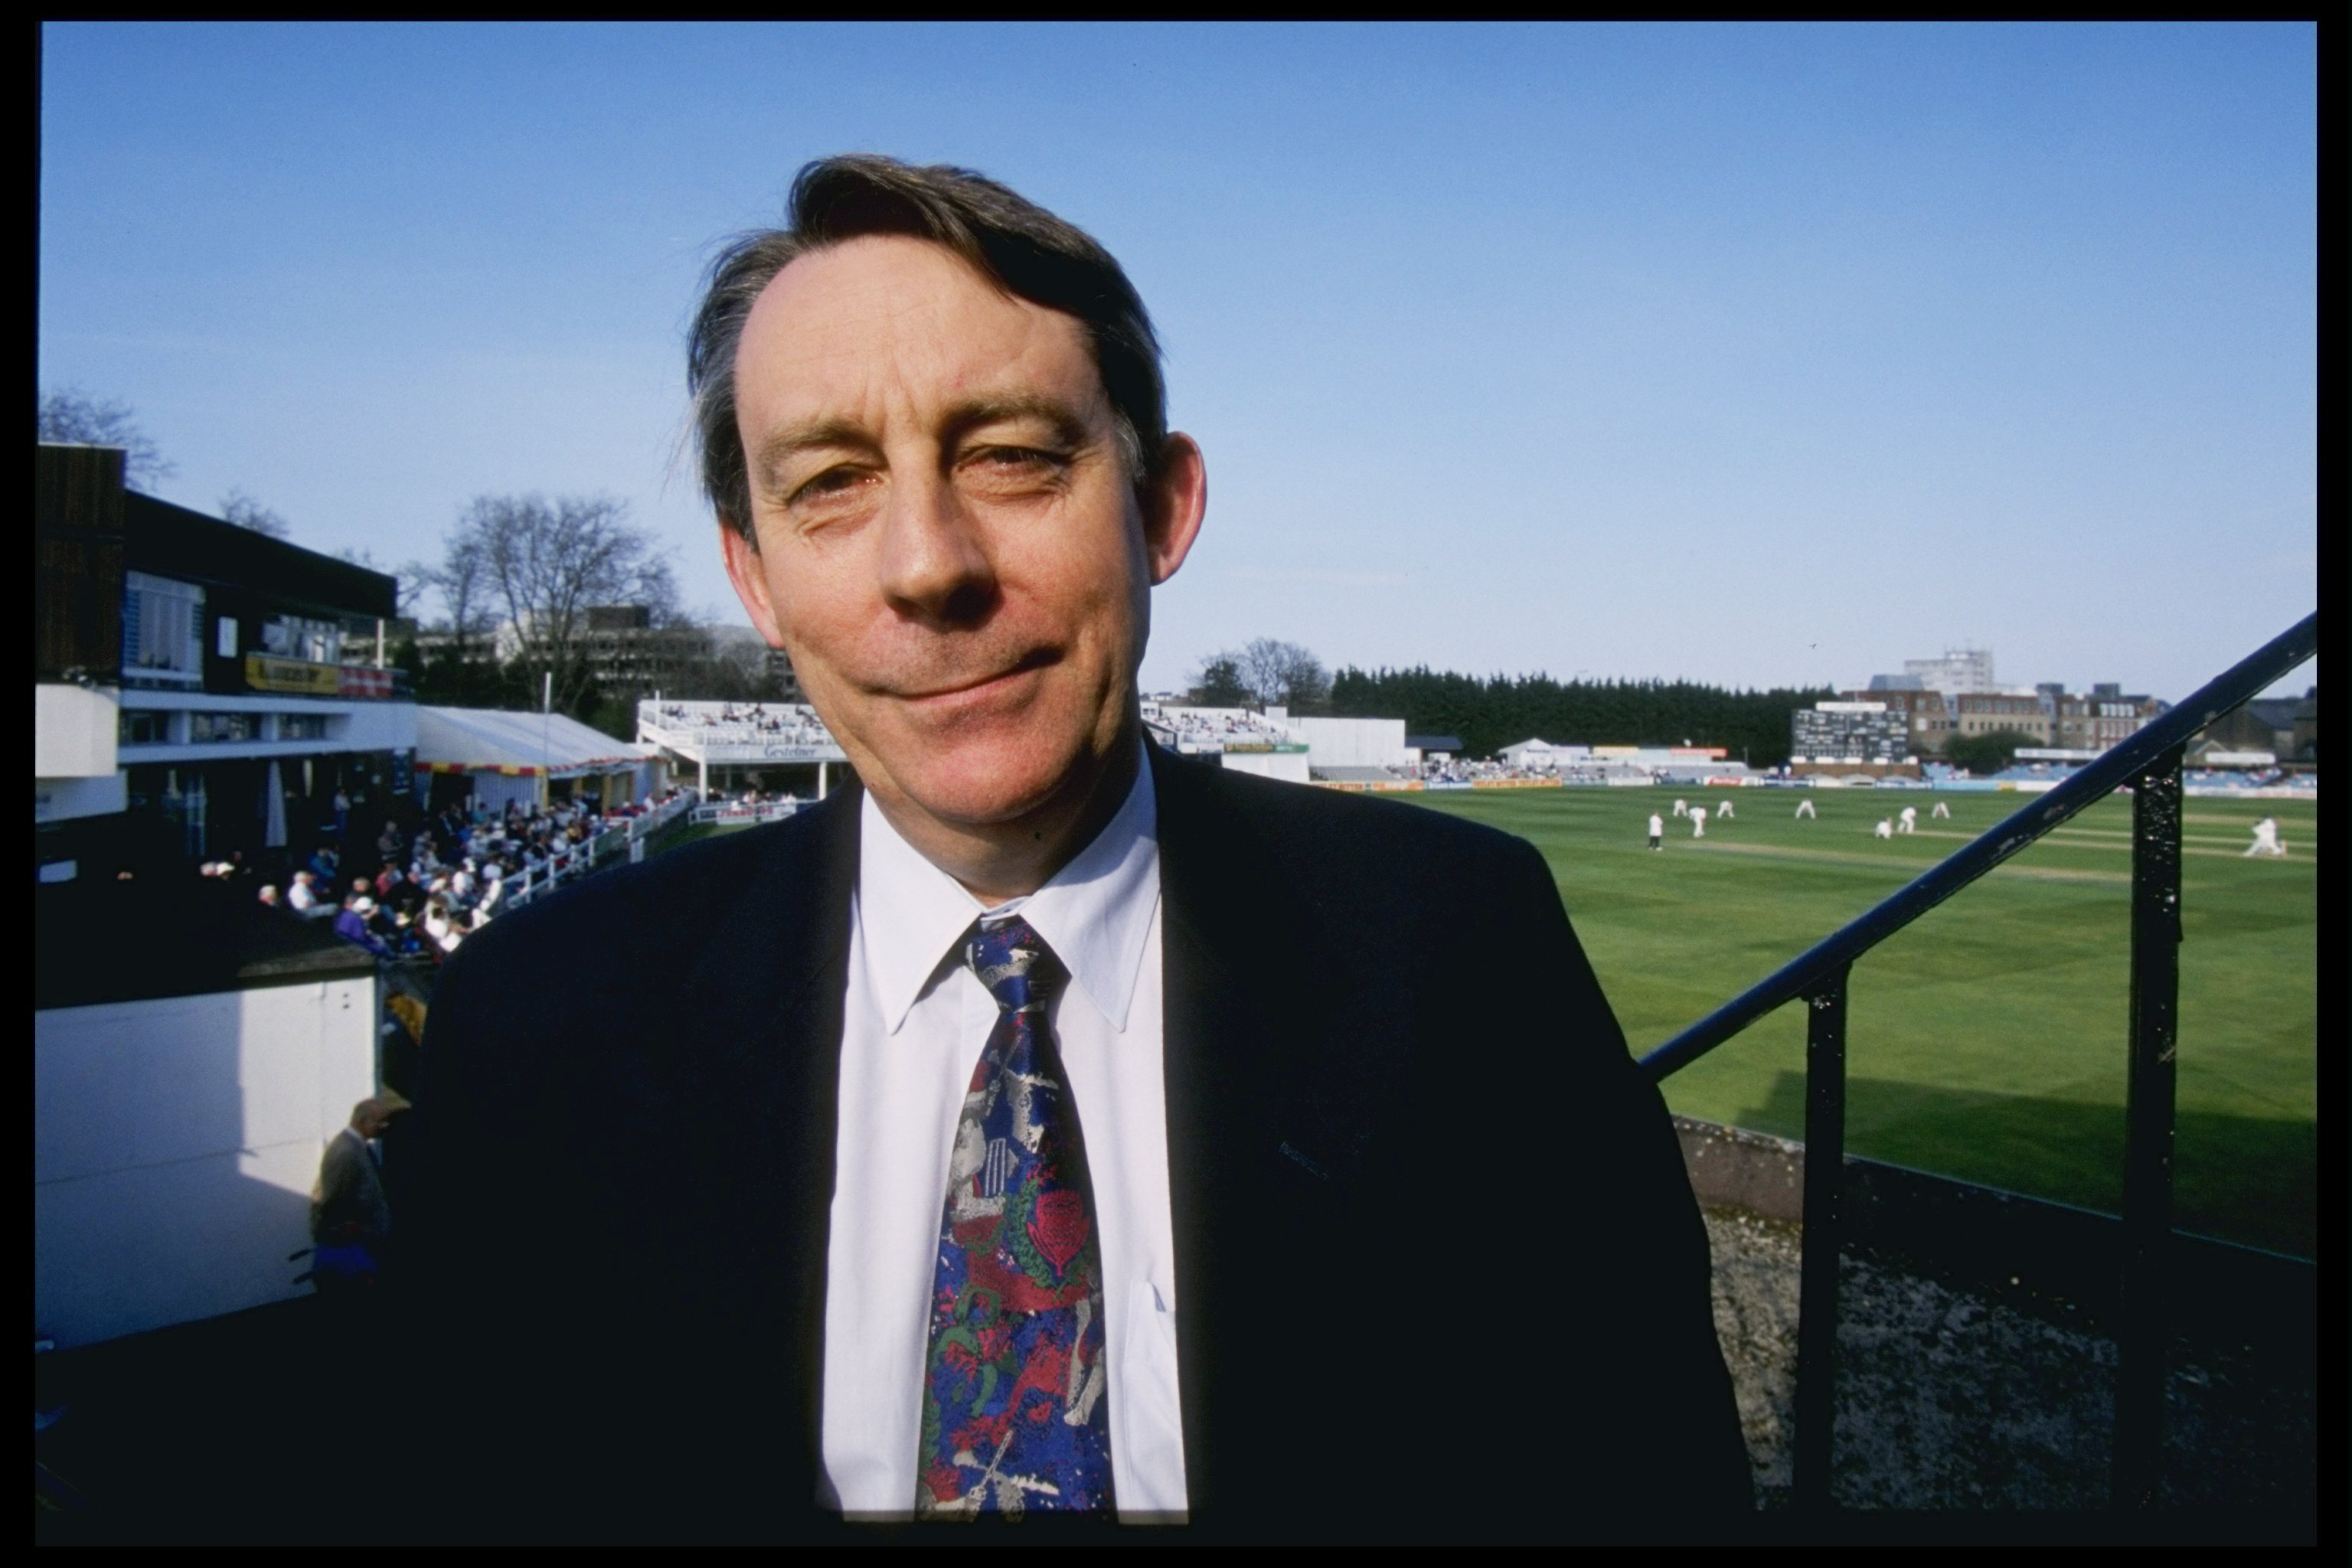 Undated:  A portrait of David Acfield of Essex county cricket club and the T.C.C.B. at Chelmsford. Mandatory Credit: Clive Mason/Allsport UK